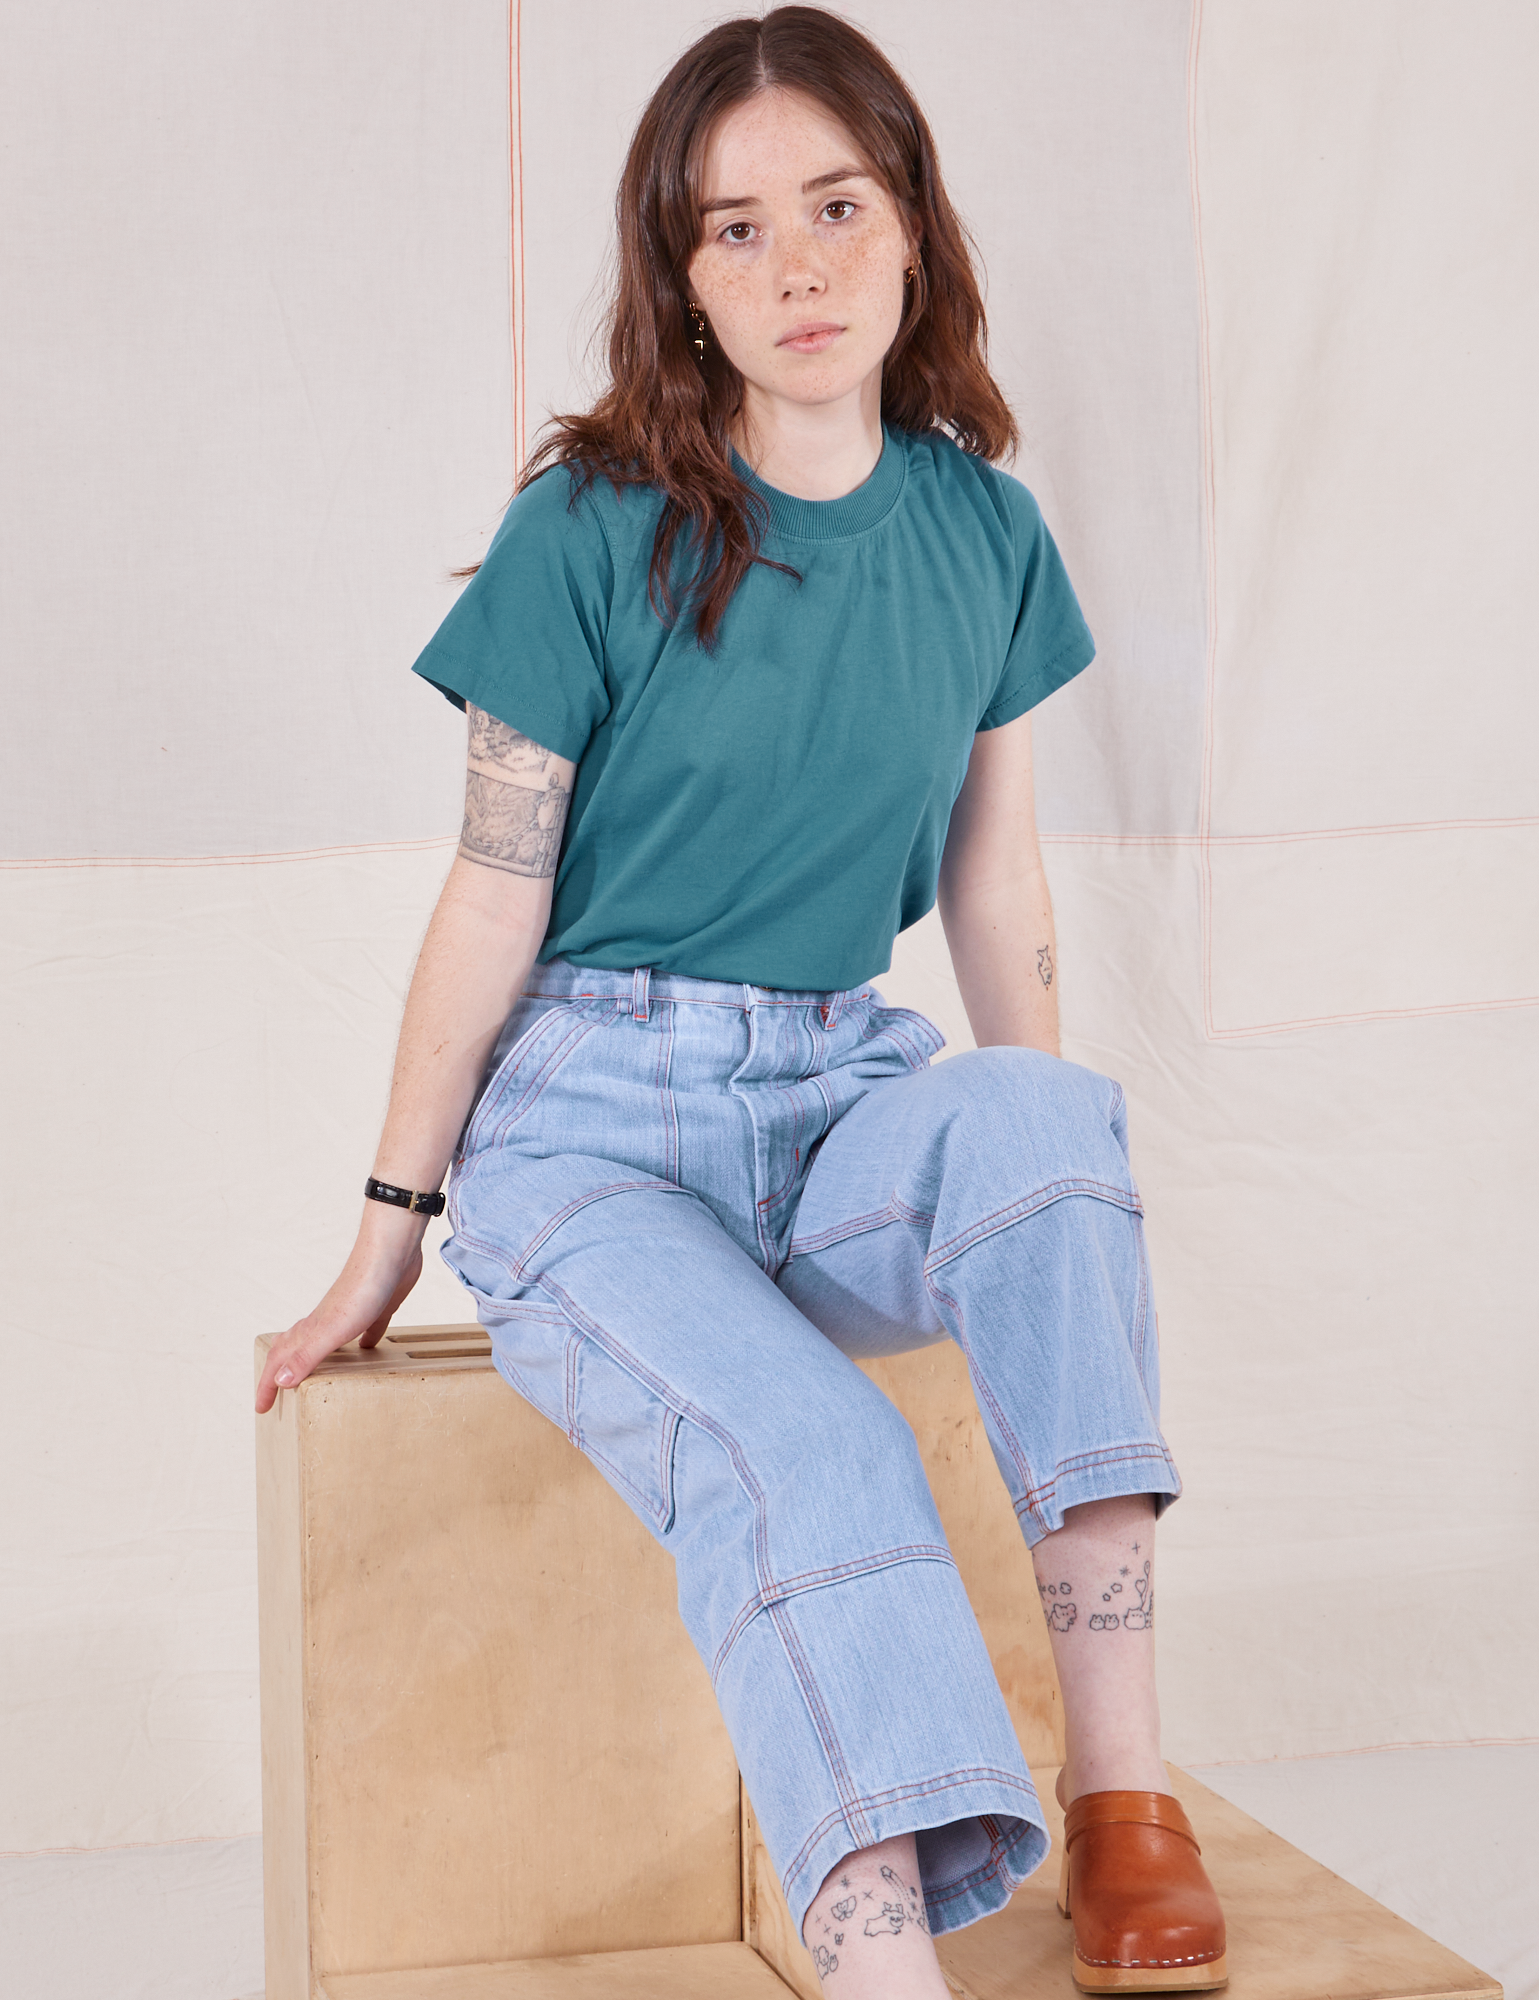 Hana is wearing Organic Vintage Tee in Marine Blue and light wash Carpenter Jeans